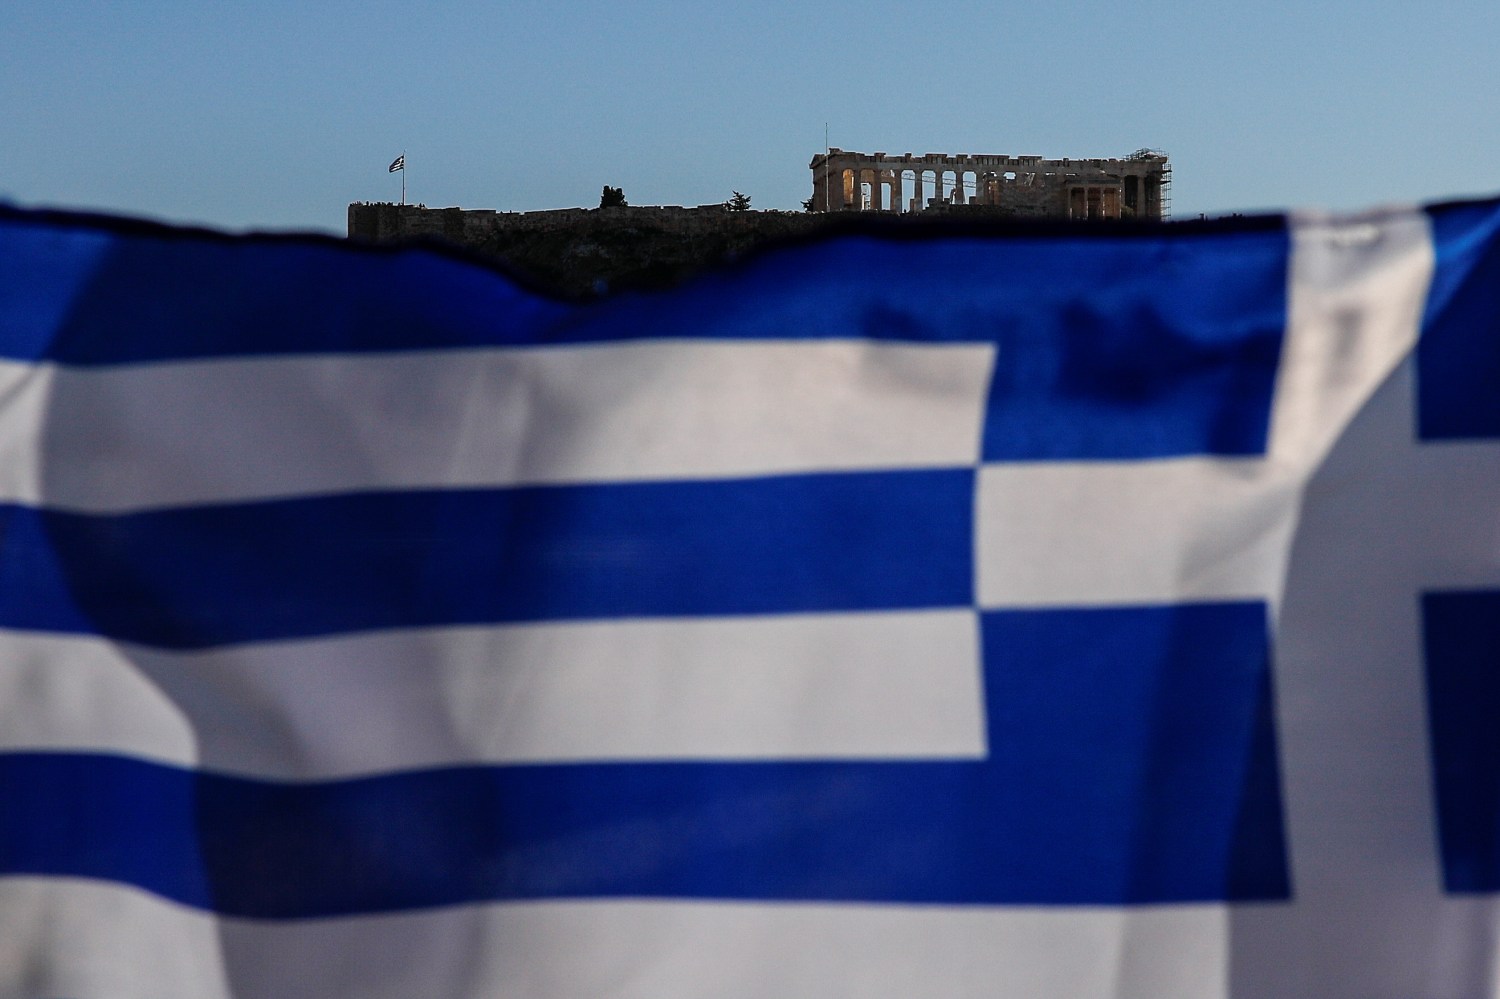 A Greek national flag flutters, as the ancient Parthenon temple is seen atop the Acropolis hill, in Athens, Greece, March 1, 2019. REUTERS/Alkis Konstantinidis - RC1476890910